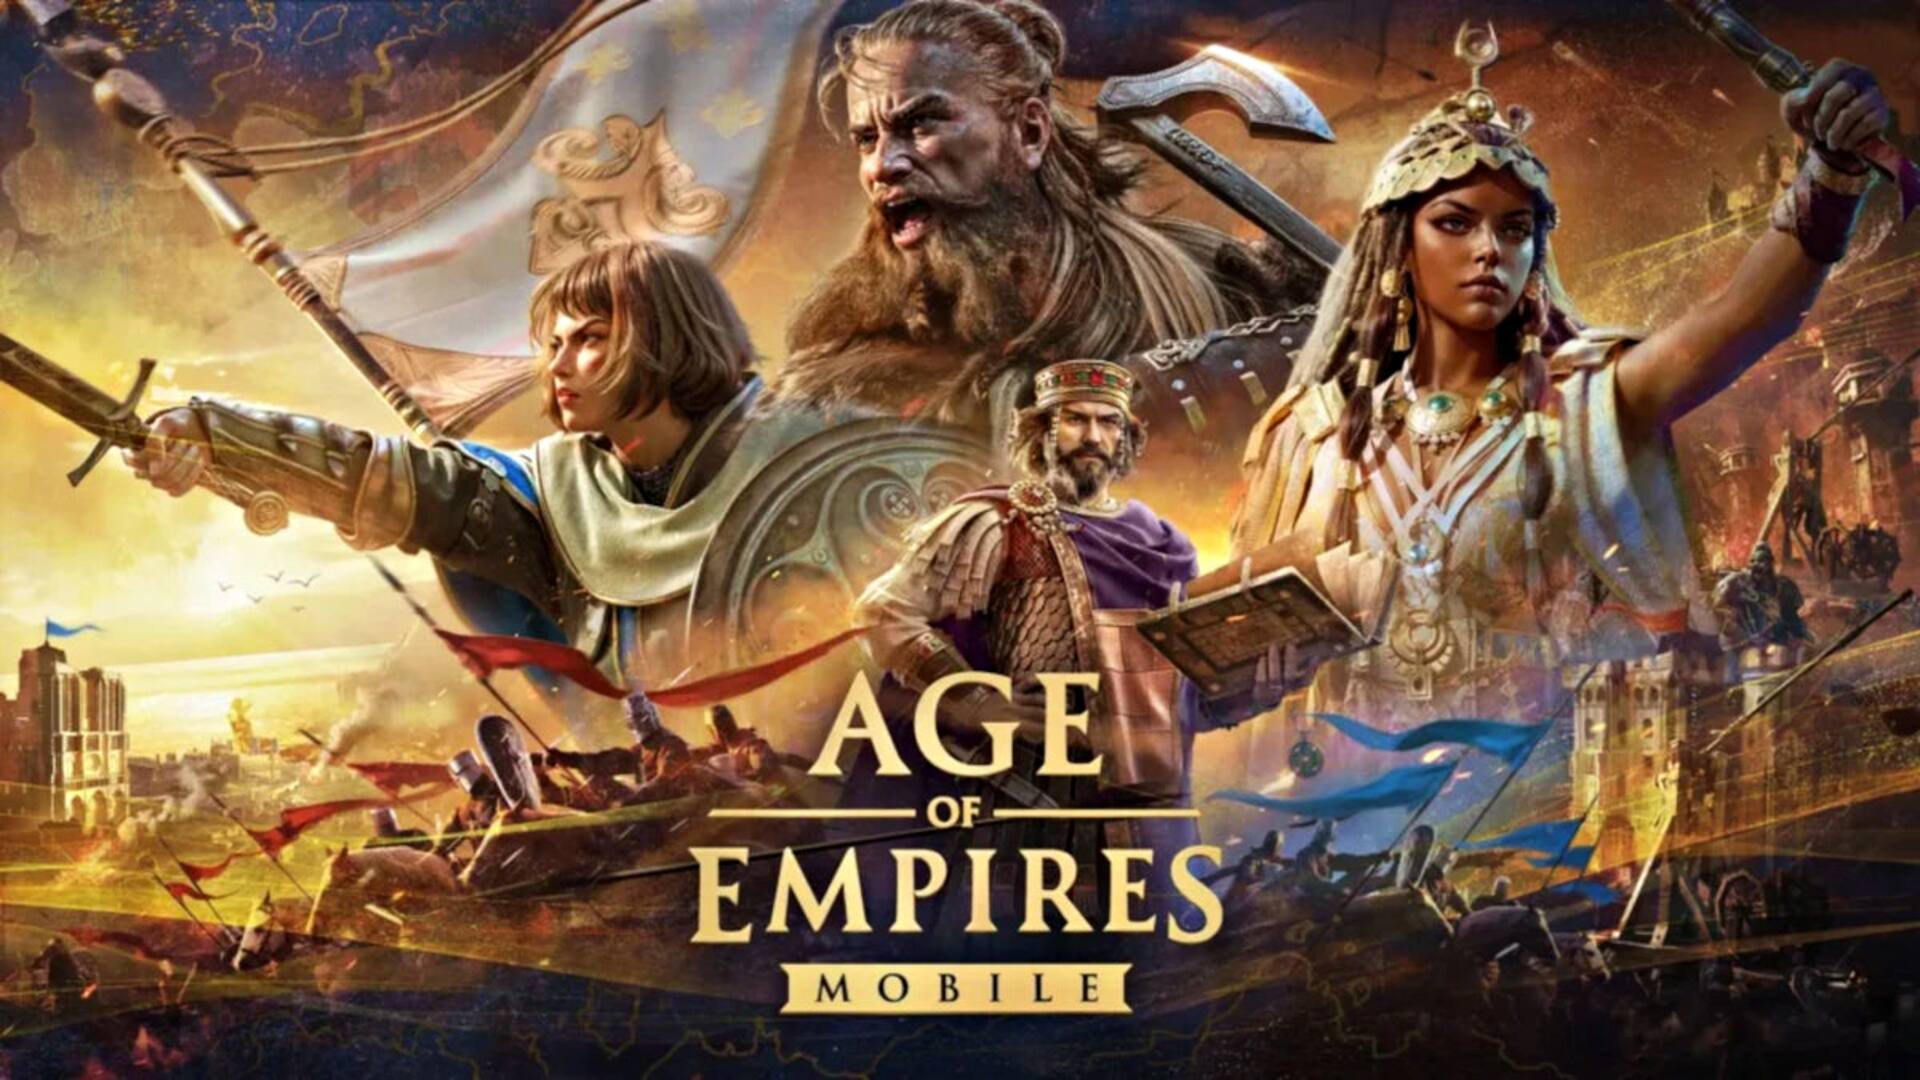 Microsoft partners with China's TiMi for 'Age of Empires Mobile'